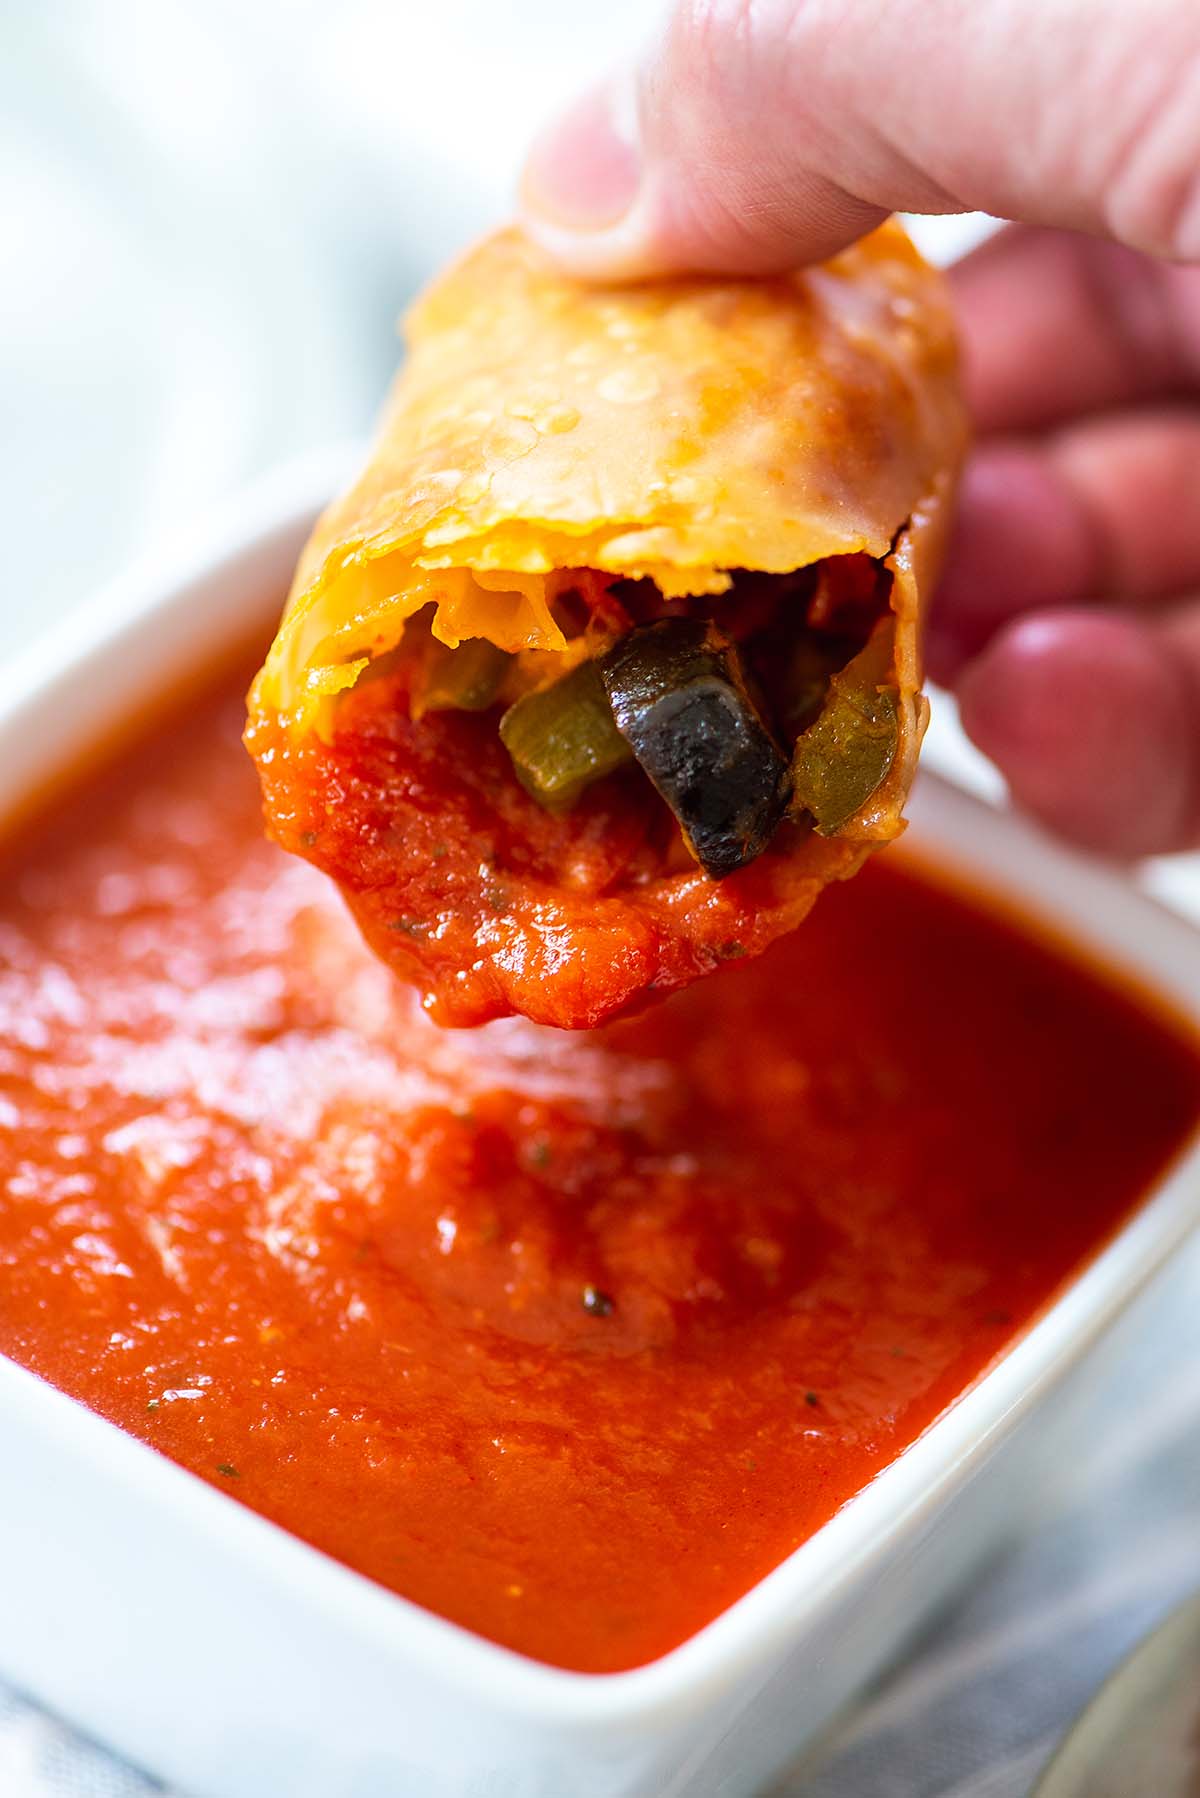 Person dipping an egg roll into pizza sauce.